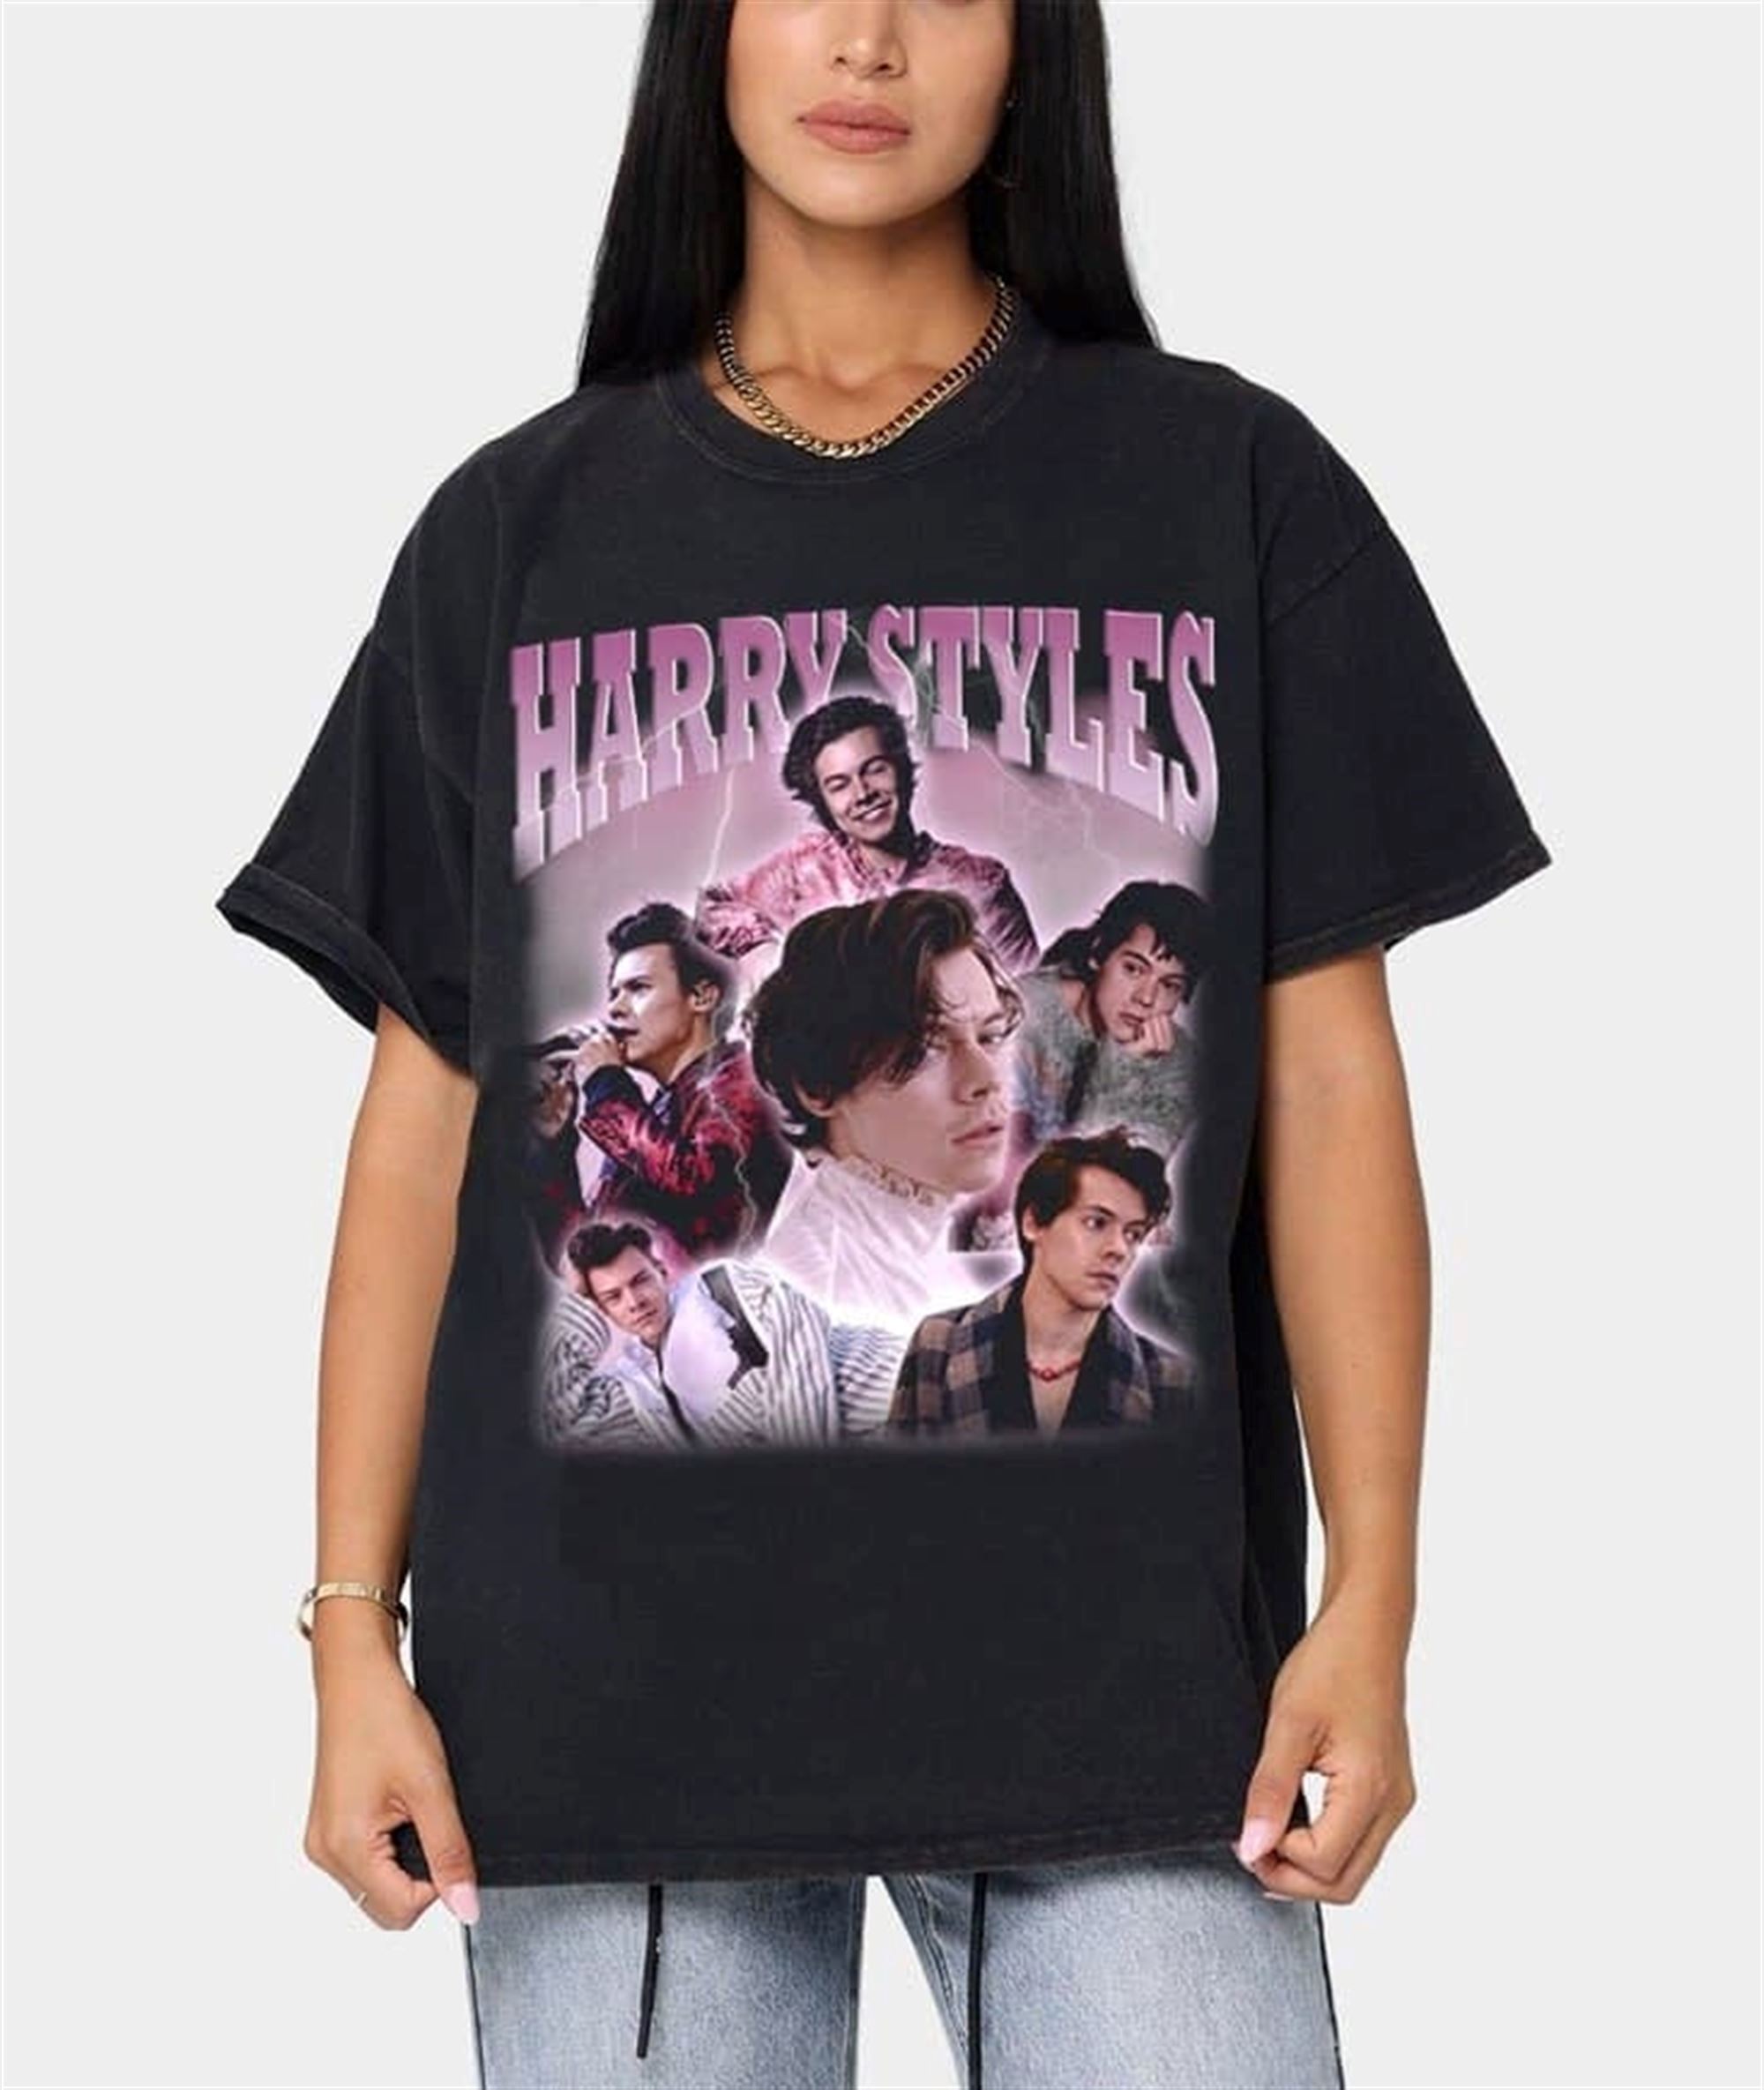 Limited Editon Harry Styles Shirt Harry Styles Vintage Shirtharry Styles Gift Shirt Album Cover Shirt One Direction Shirt Music Gift Shirt Fan Gift H 